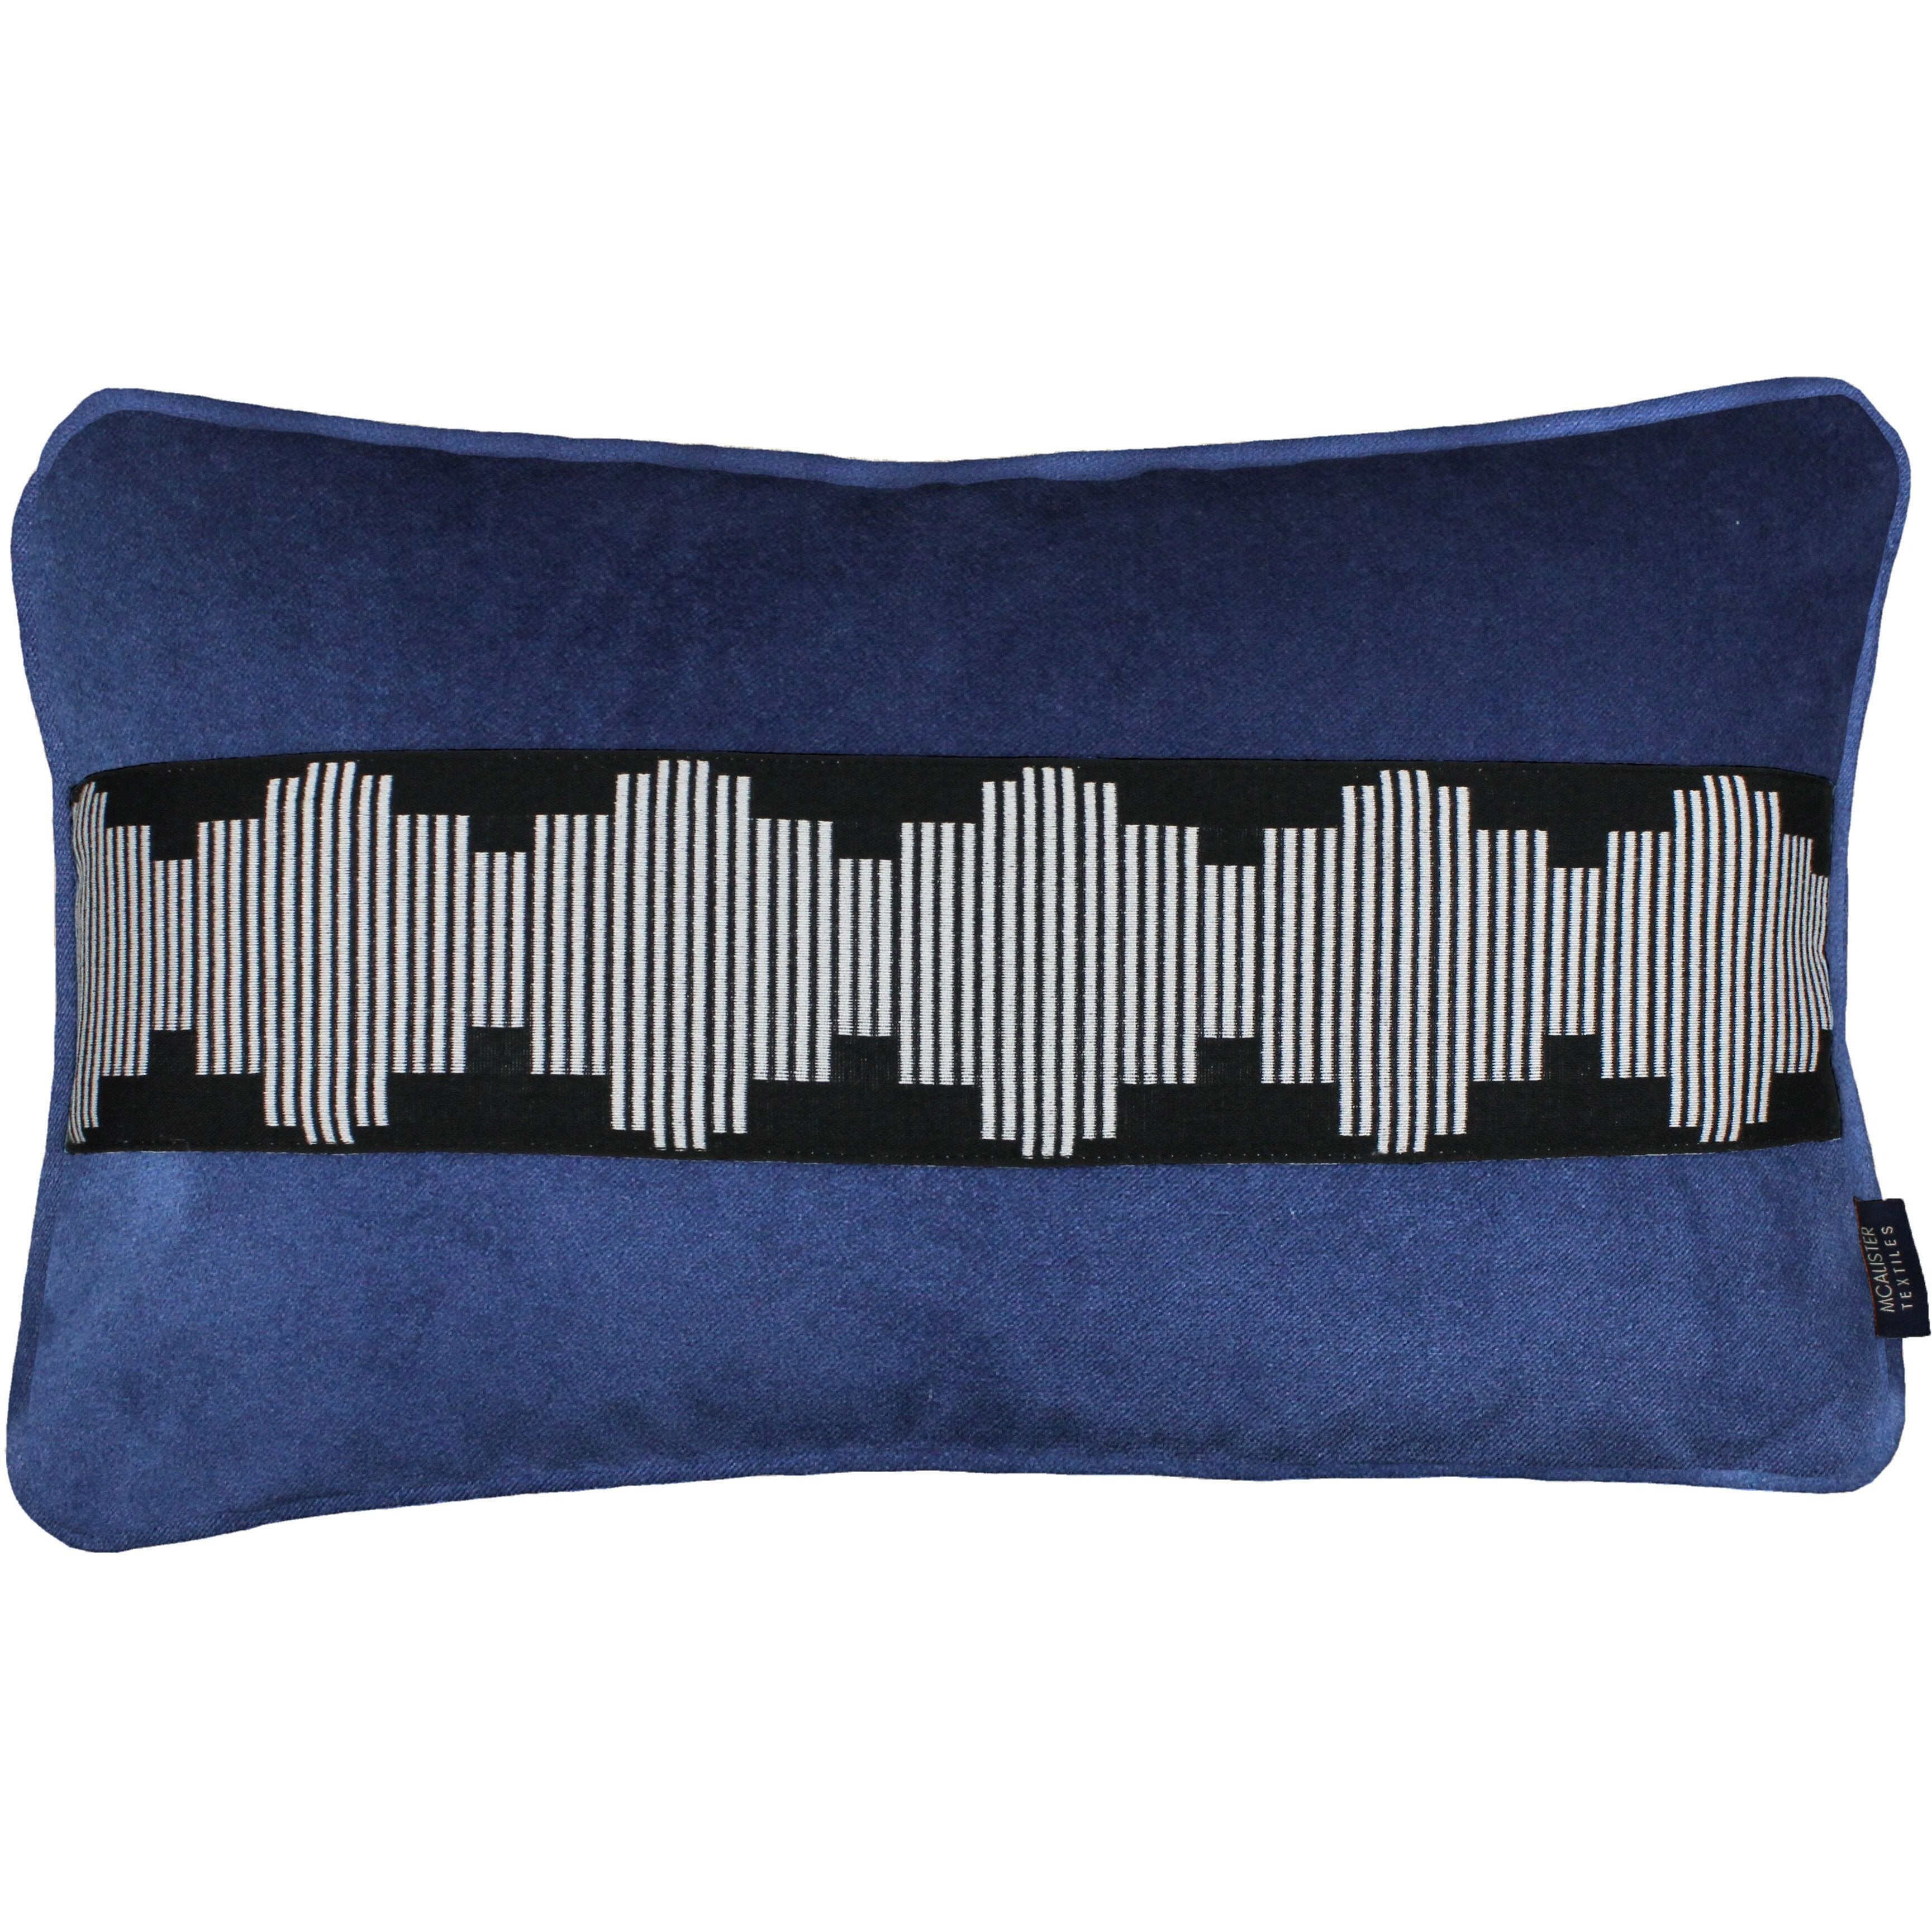 McAlister Textiles Maya Striped Navy Blue Velvet Cushion Cushions and Covers Cover Only 50cm x 30cm 